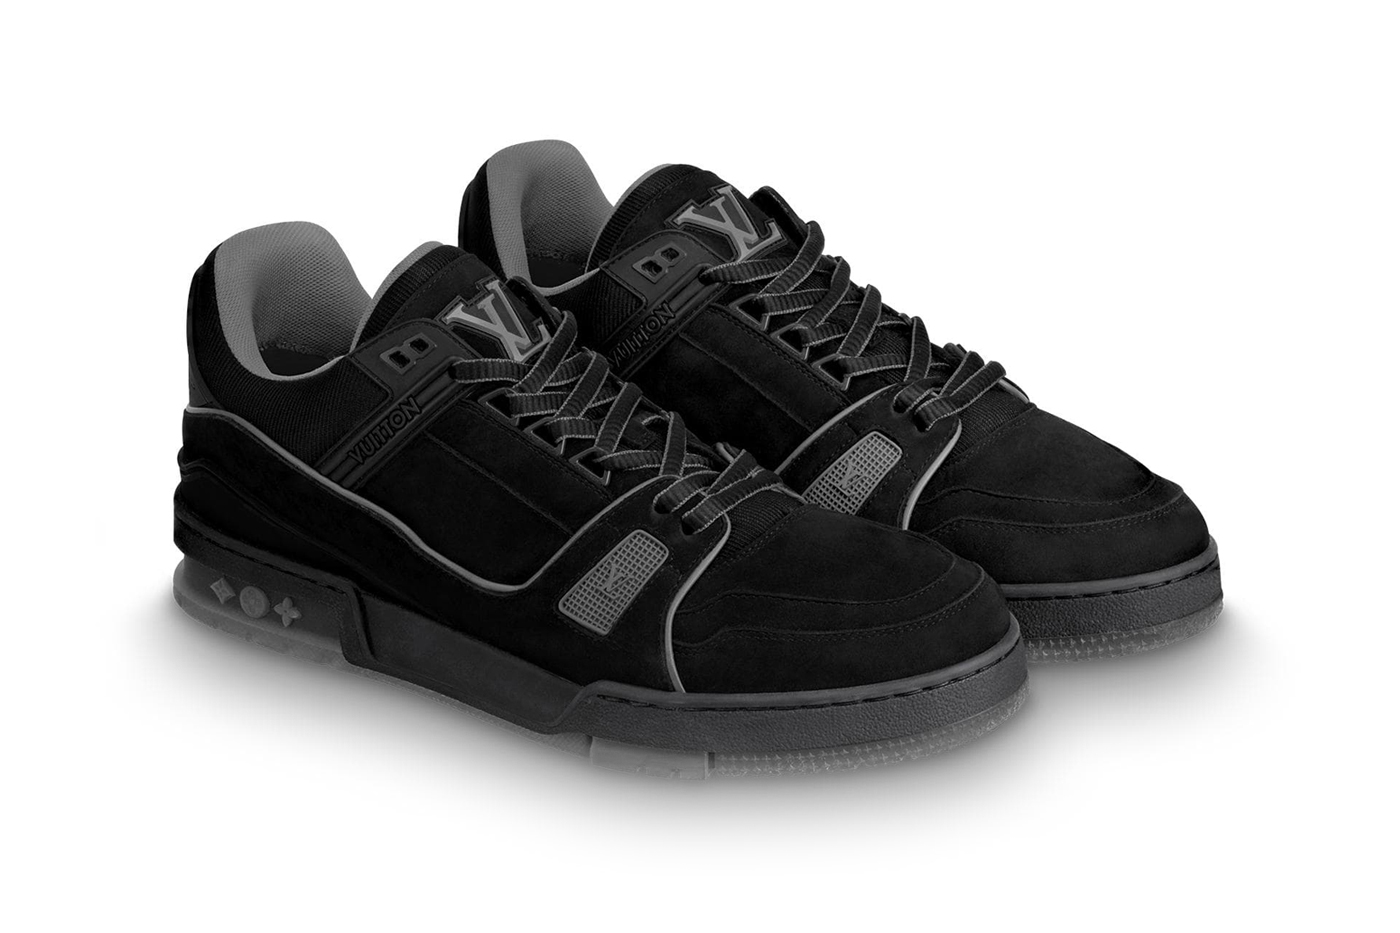 completely black trainers